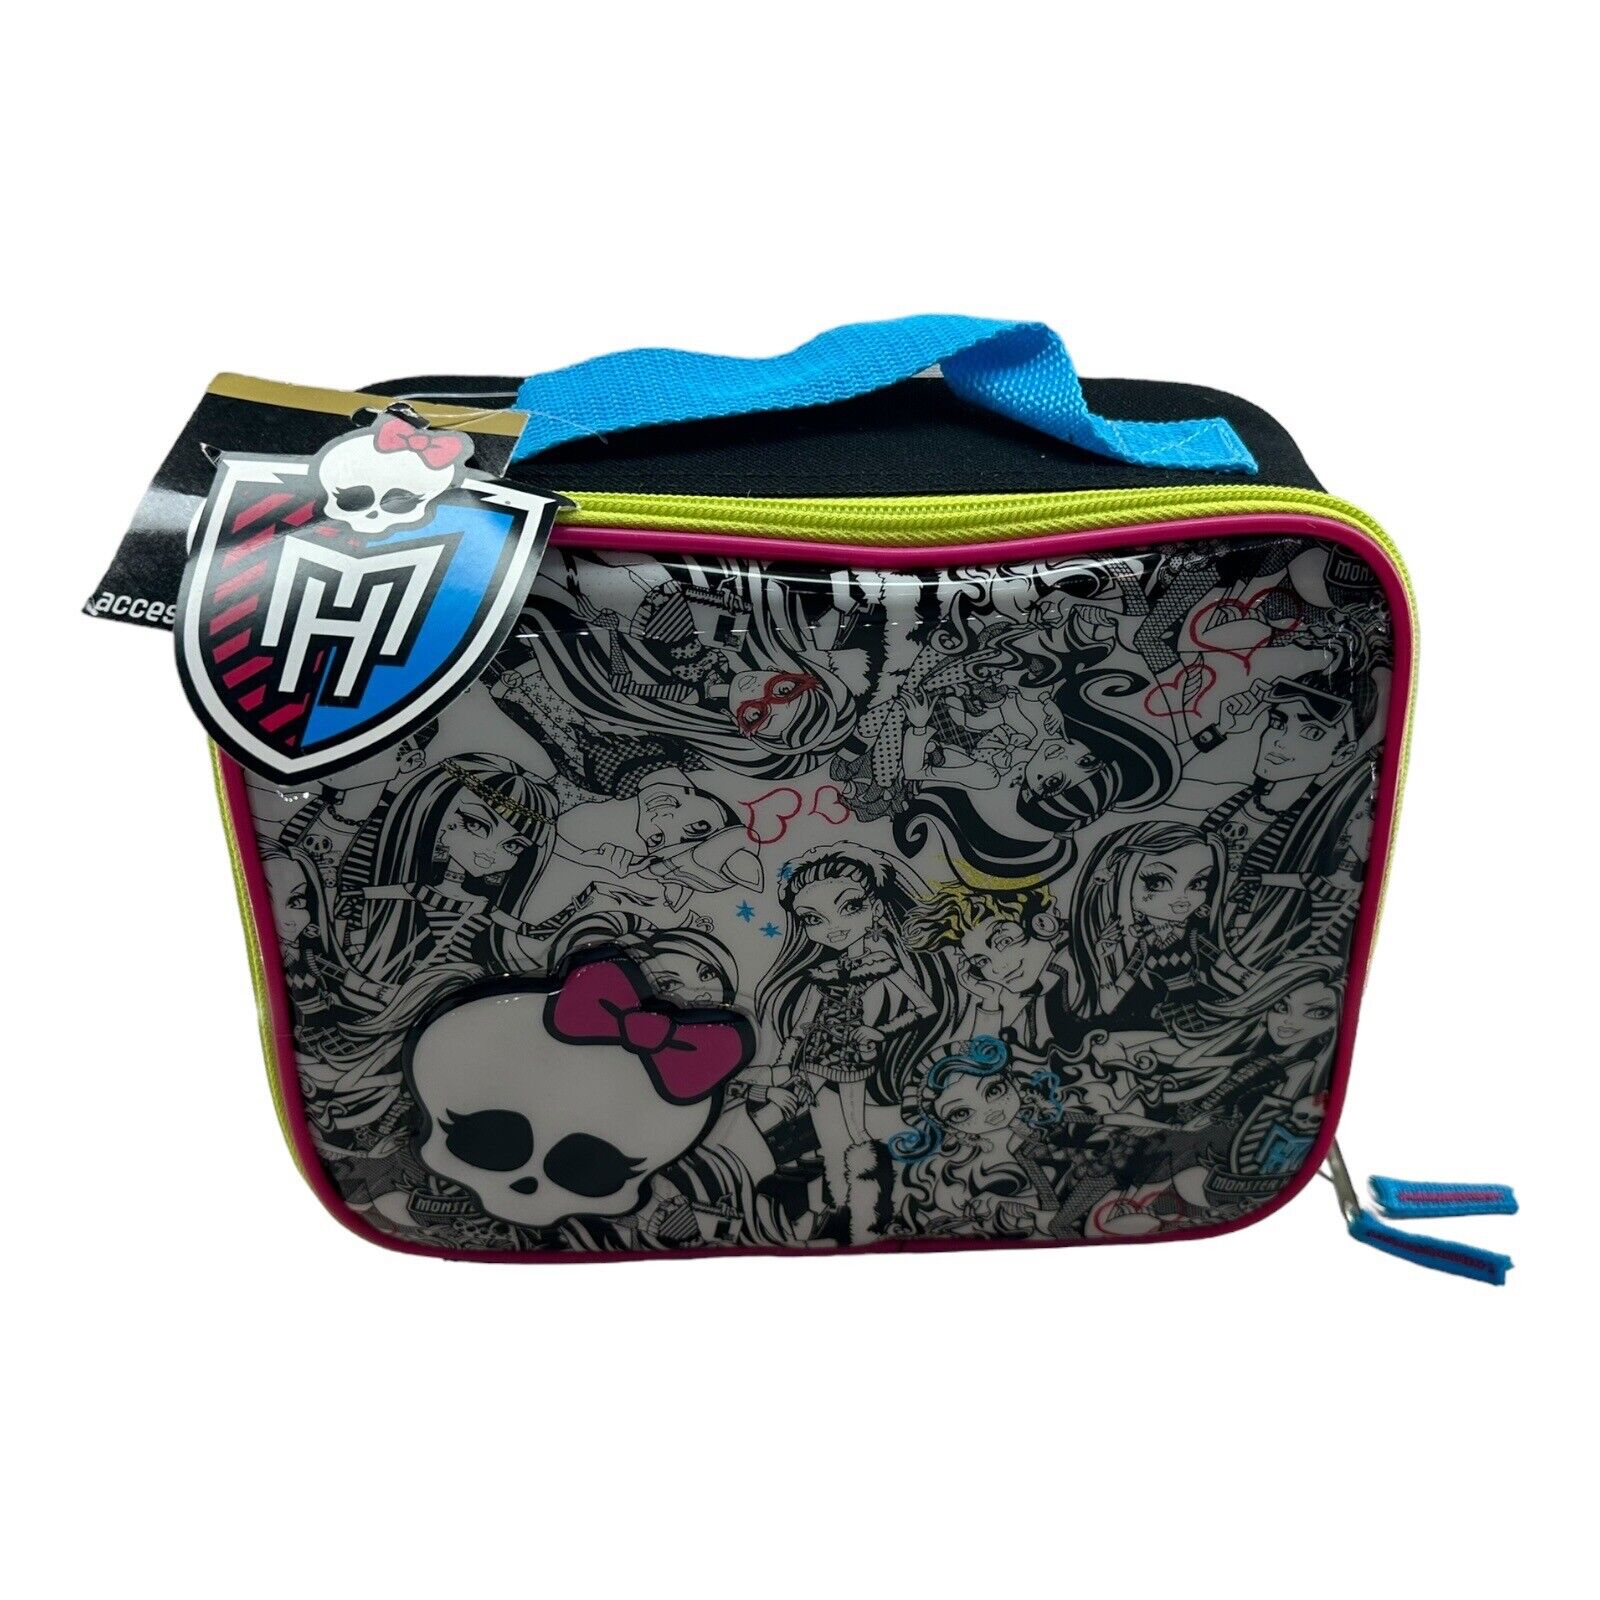 2012 Monster High Insulated Lunch Box Bag Case Frankie Cleo Draculara NWT